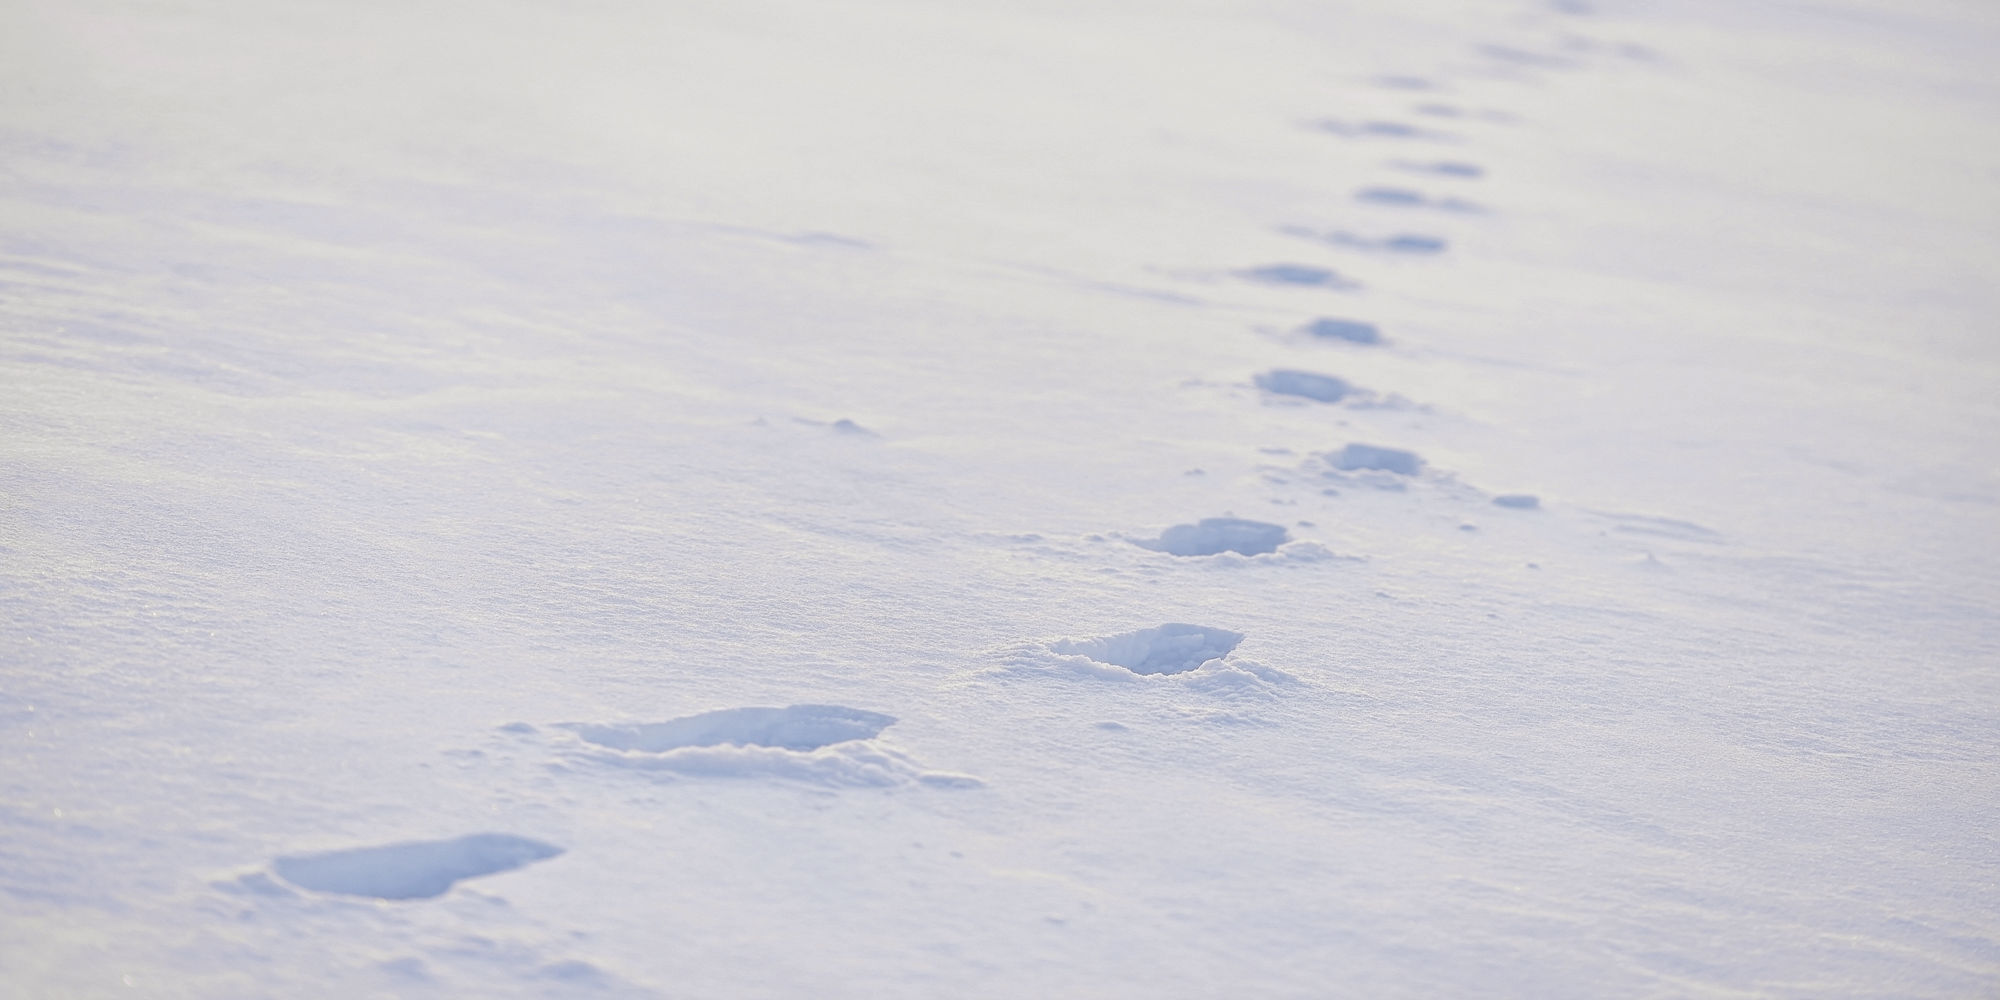 Footprints in the snow lead to an emotional rescue | Outdoors